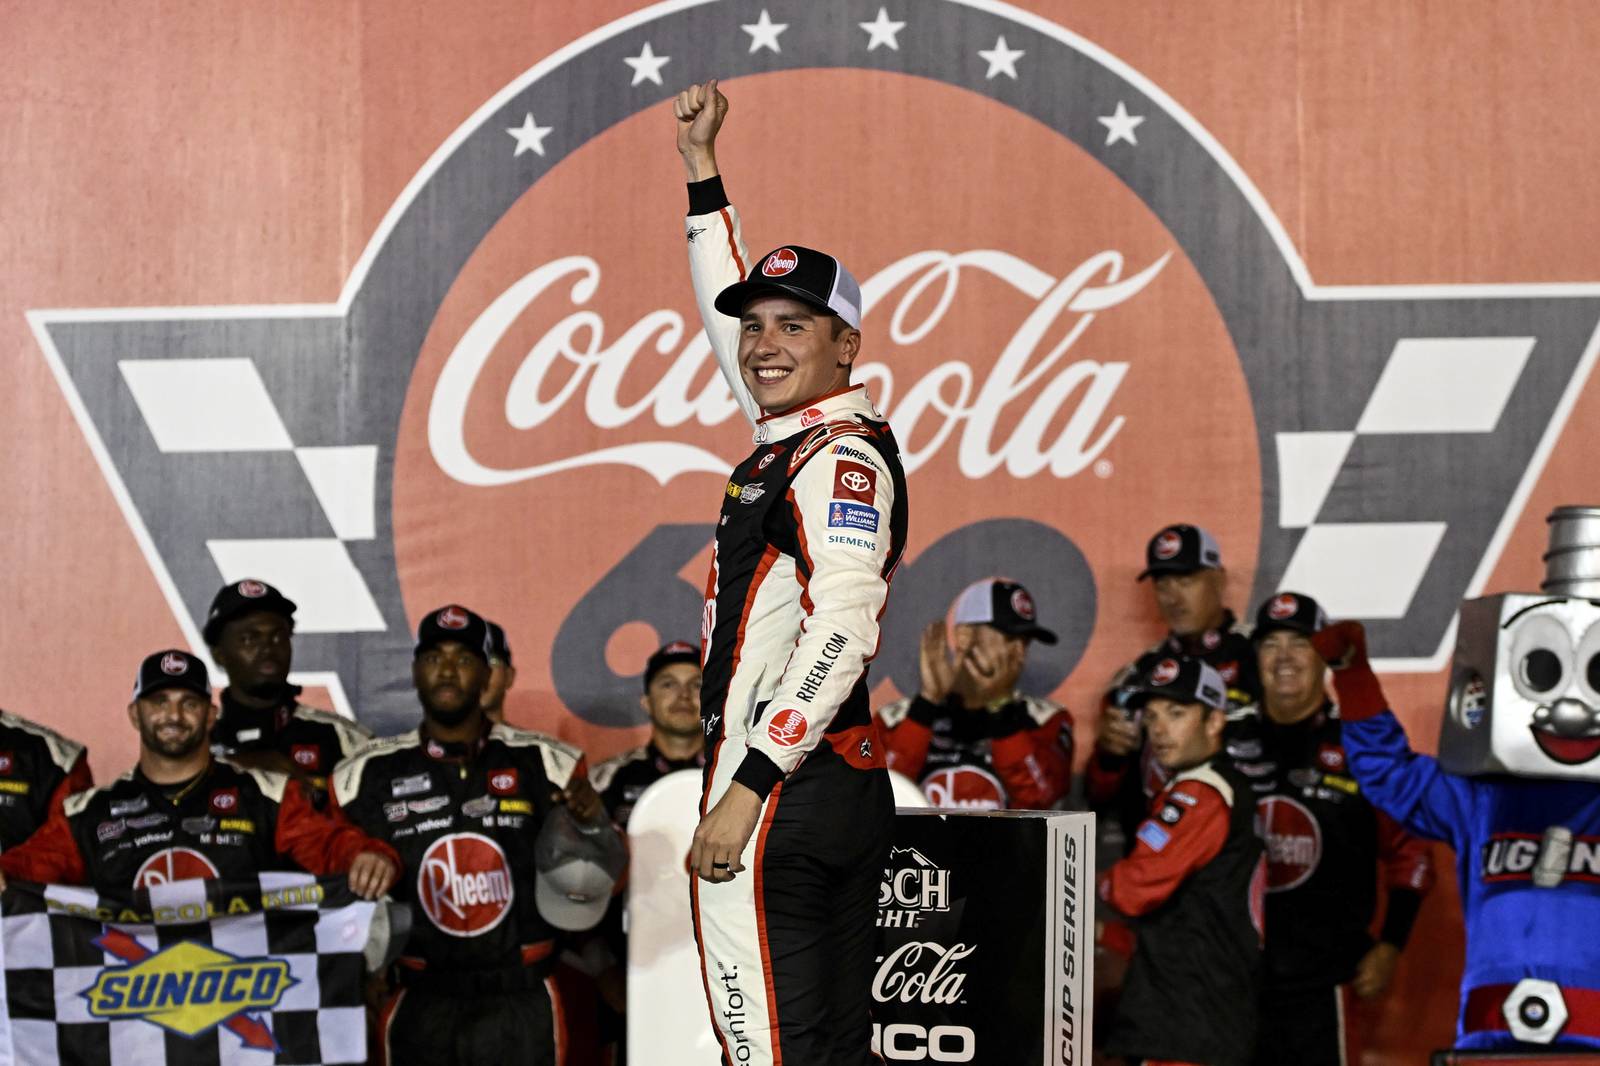 Christopher Bell wins the rainshortened CocaCola 600 for his 8th